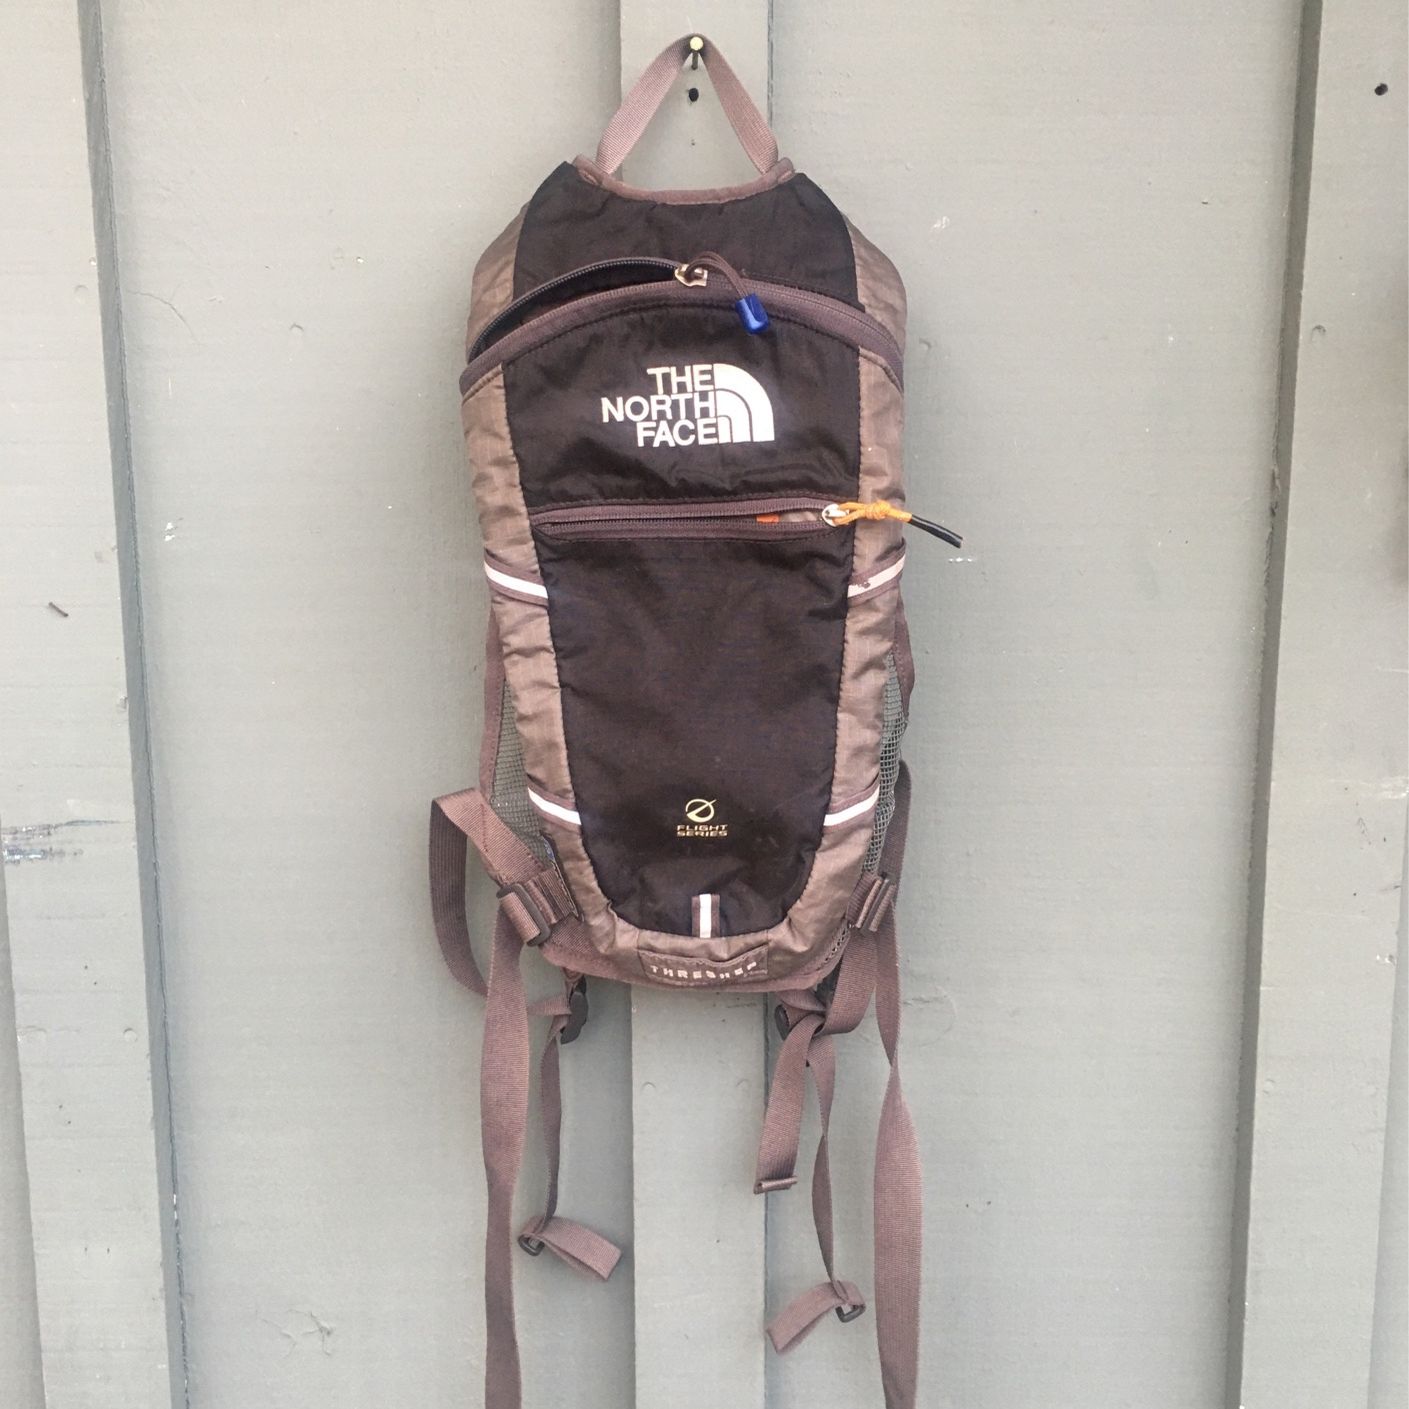 The North face Hydro Backpack